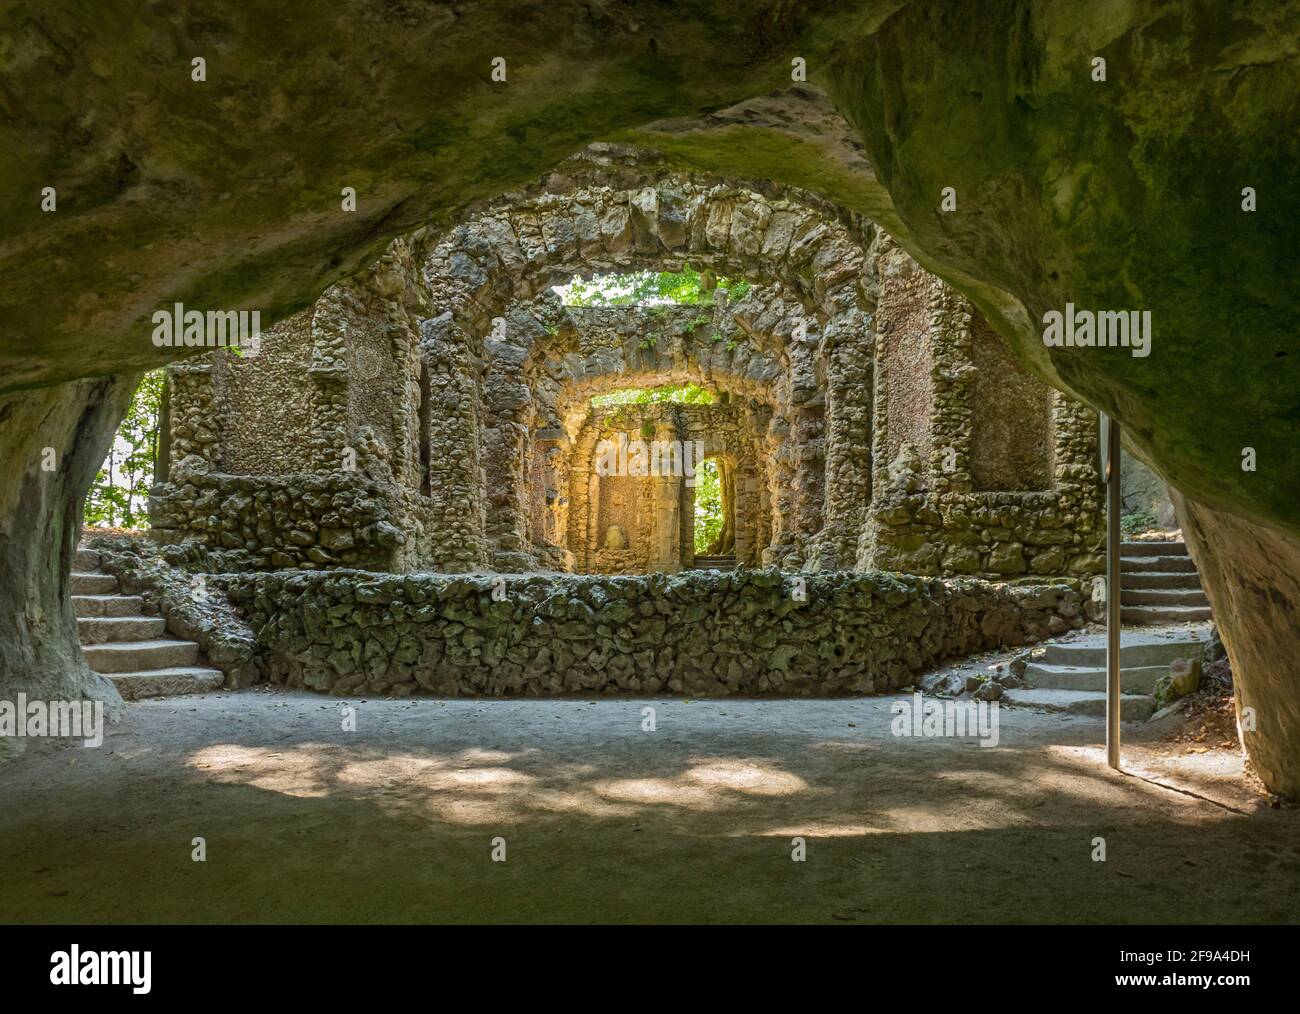 Germany, Bavaria, Wonsees-Sanspareil, view from the Grotto of the Calypso into the ruin theater in the 'Felsengarten Sanspareil'. The listed English landscape garden was laid out in the 18th century under Margrave 'Friedrich von Bayreuth' and his wife Margravine 'Wilhelmine von Bayreuth'. Stock Photo